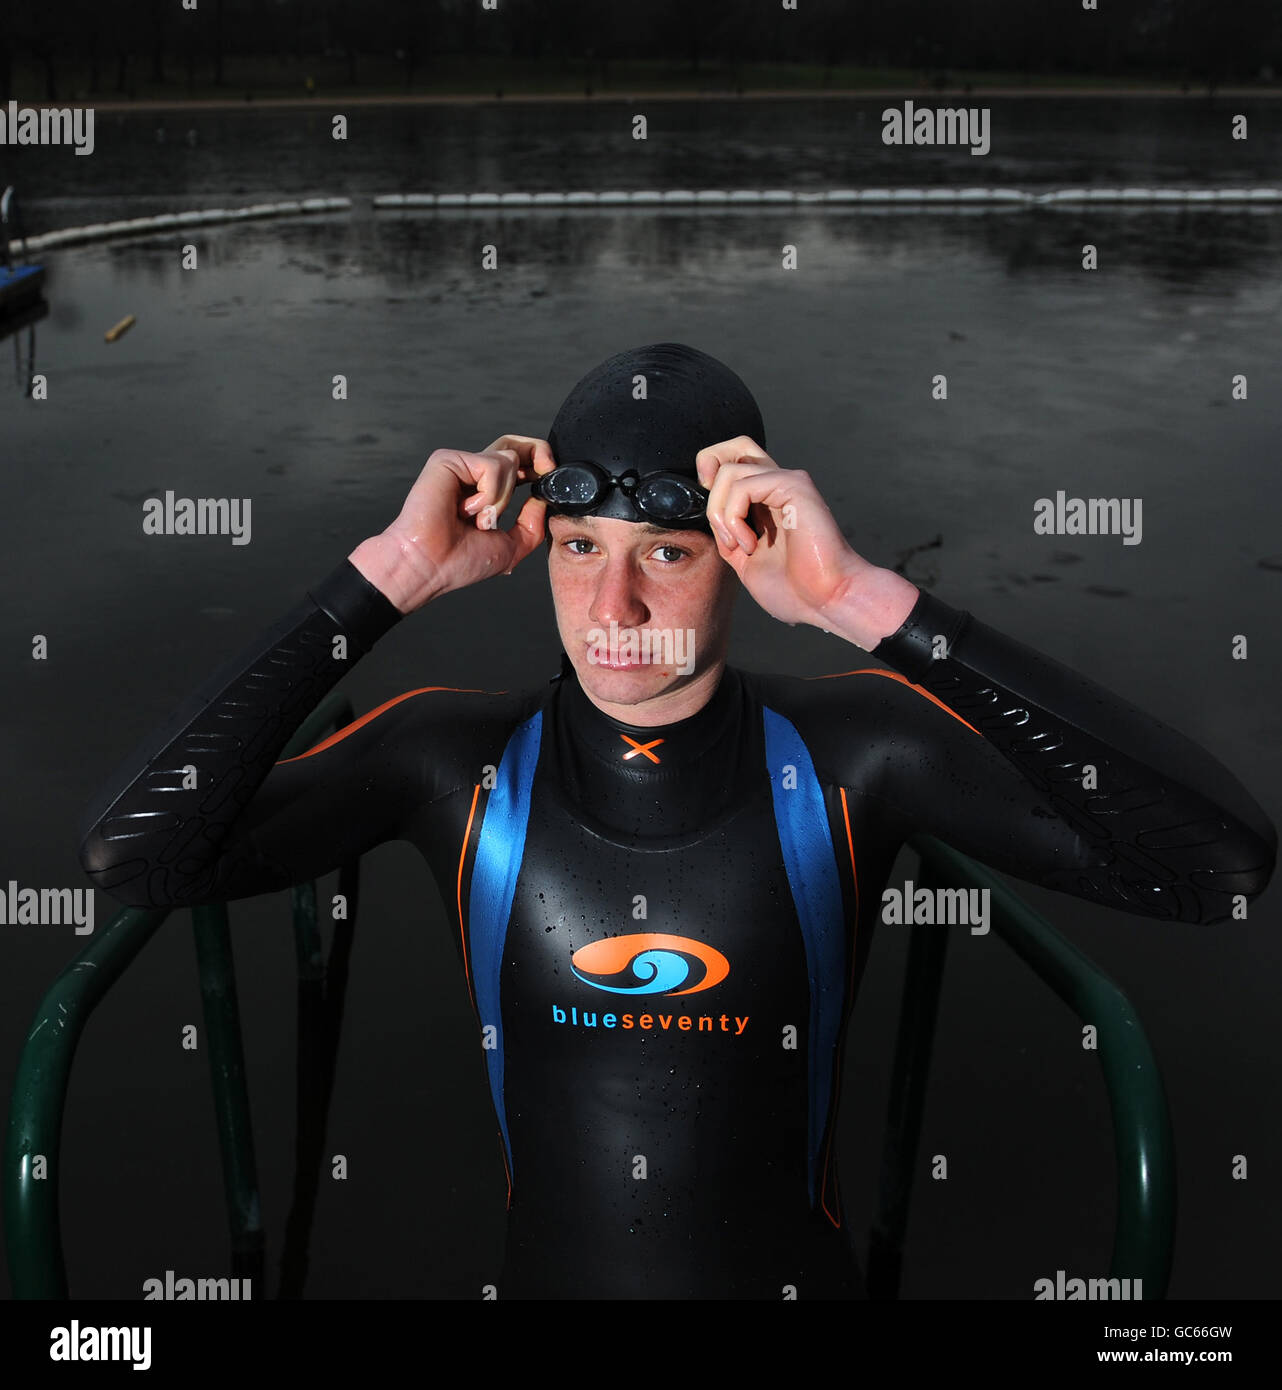 Athletics - Alistair Brownlee Photo Call - Serpentine Lake. Triathlon world champion Great Britain's Alistair Brownlee poses for media during the photocall at Serpentine Lake, London. Stock Photo